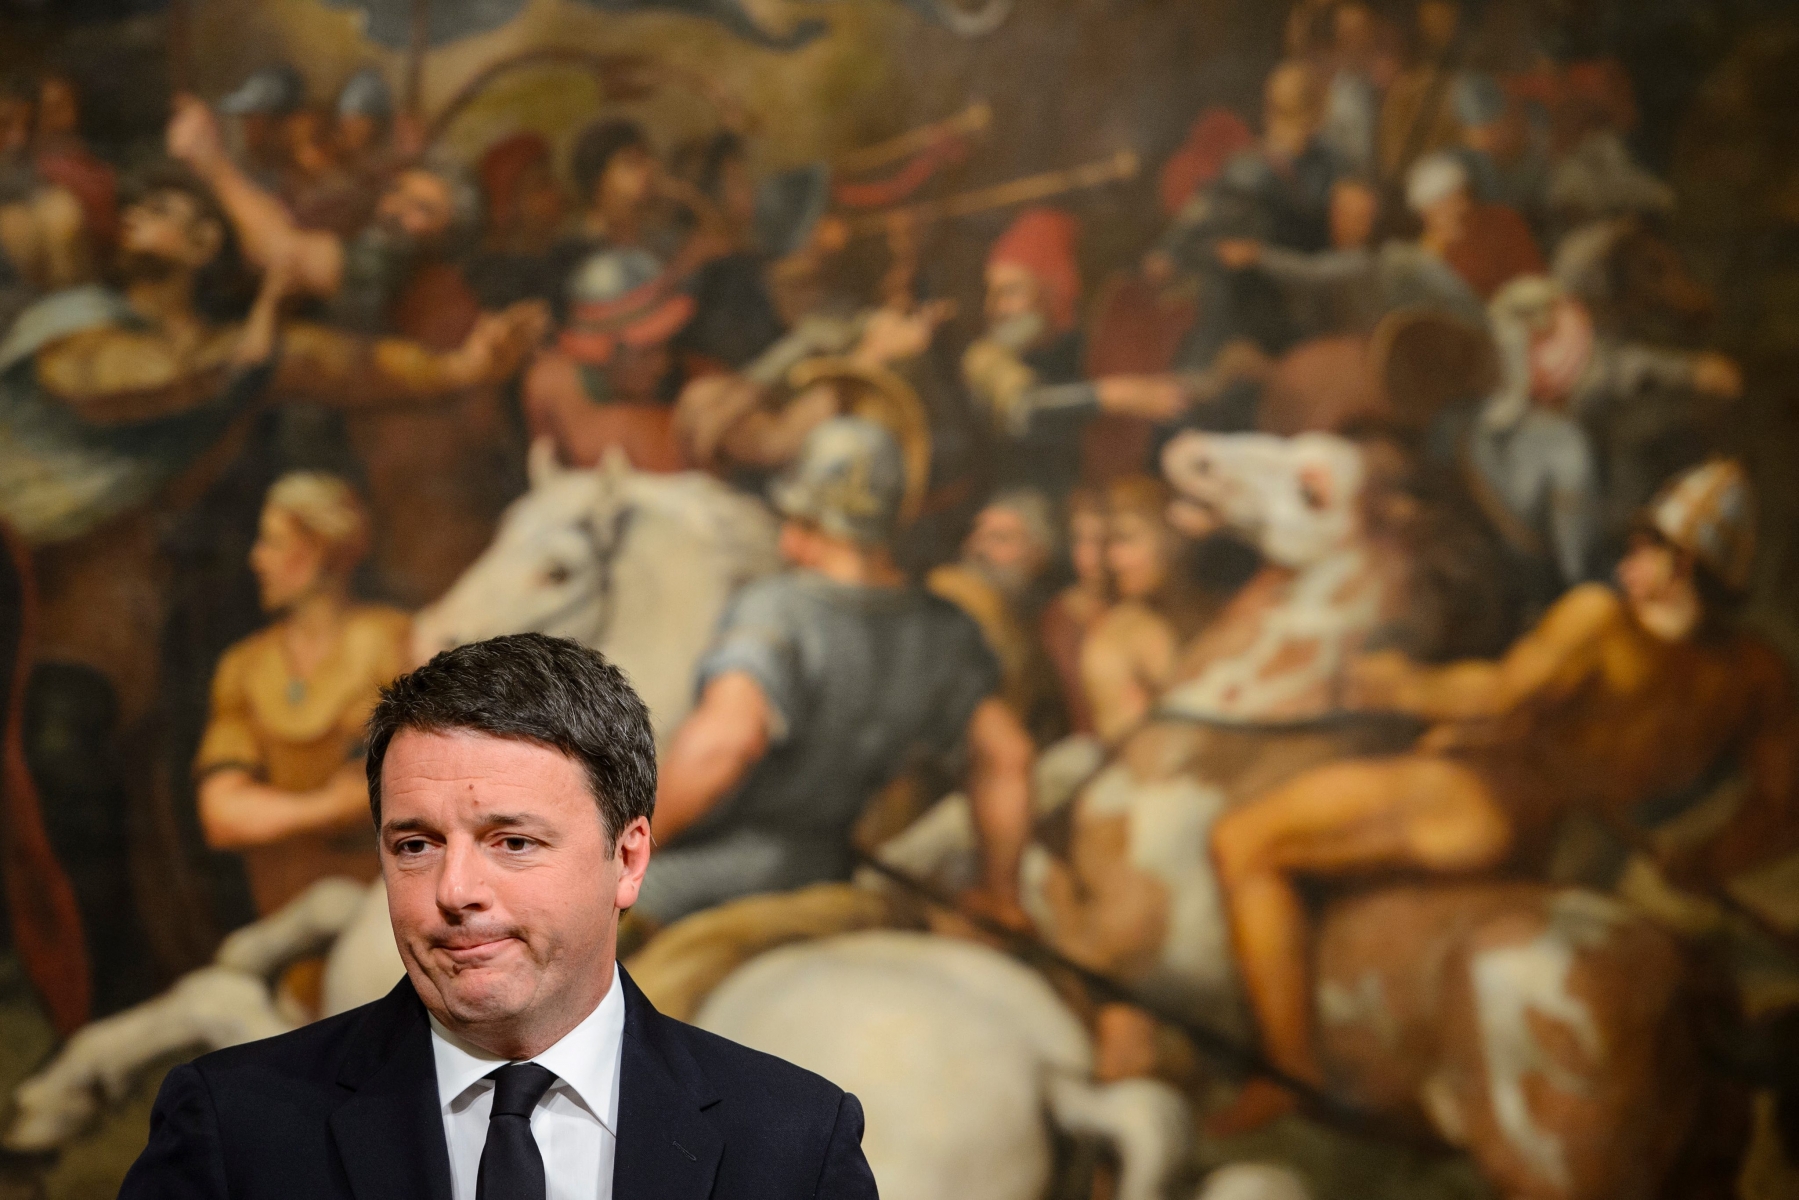 epa05660300 The Italian Prime Minister, Matteo Renzi, speaks at the Palazzo Chigi in Rome, Italy, 04 December 2016 after the referendum on constitutional reform. Matteo Renzi has announced his resignation after exit polls on 04 December 2016 suggest a 'No' vote victory in a crucial referendum to which Renzi had tied his political future. The referendum is considered by the government to end gridlock and make passing legislation cheaper by, among other things, turning the Senate into a leaner body made up of regional representatives with fewer lawmaking powers. It would also do away with the equal powers between the Upper and Lower Houses of parliament - an unusual system that has been blamed for decades of political gridlock.  EPA/GREGOR FISCHER ITALY REFERENDUM CONSTITUTION